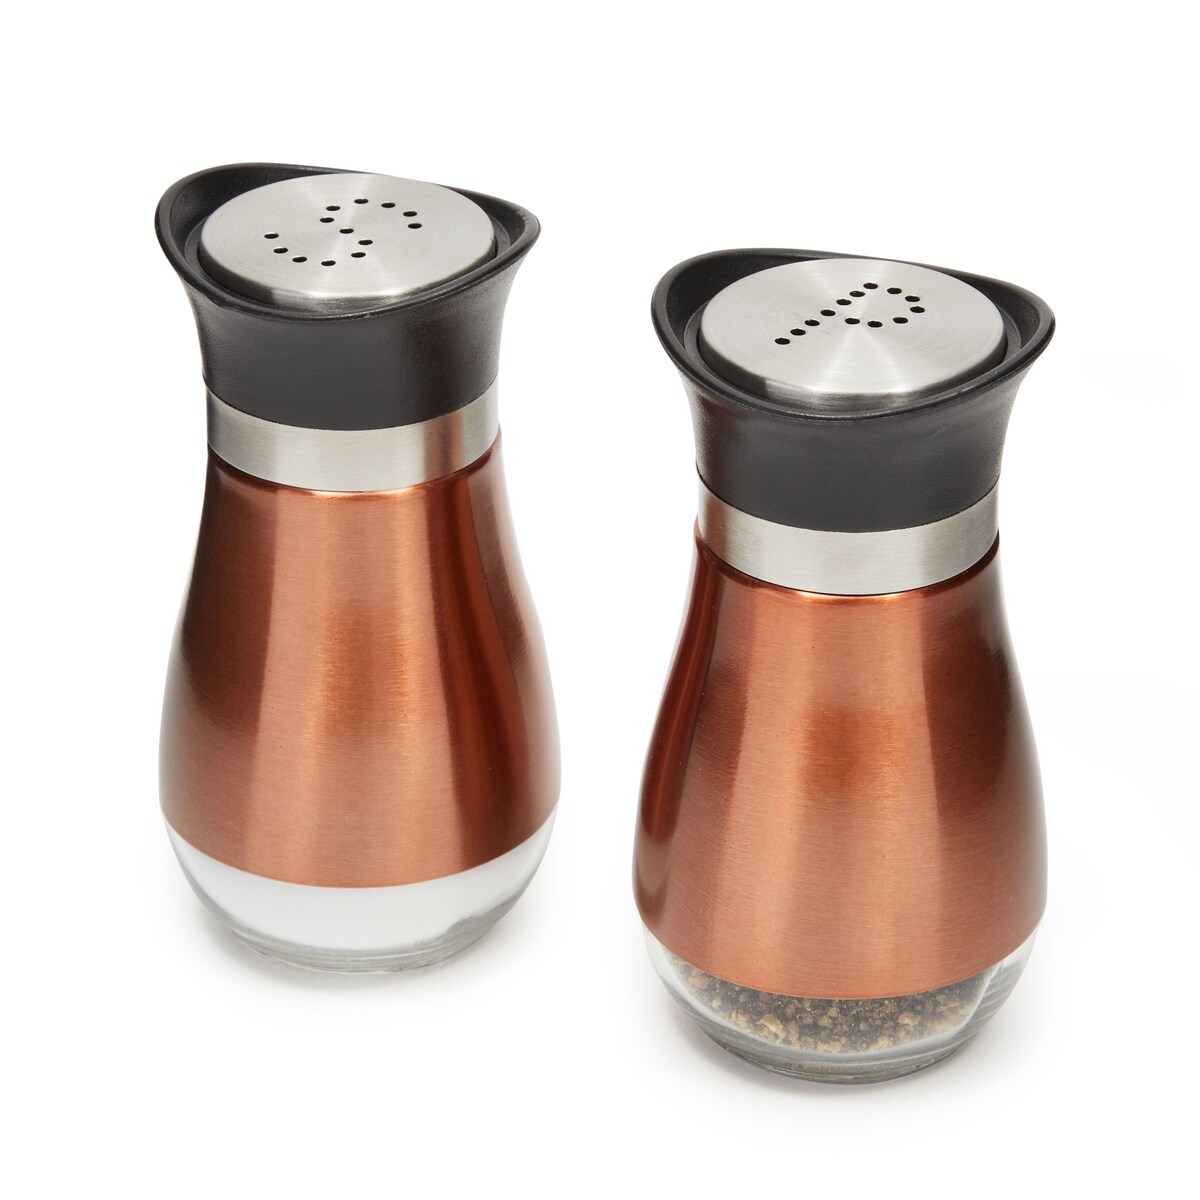 Salt And Pepper Grinders That Spice Up Your Kitchen